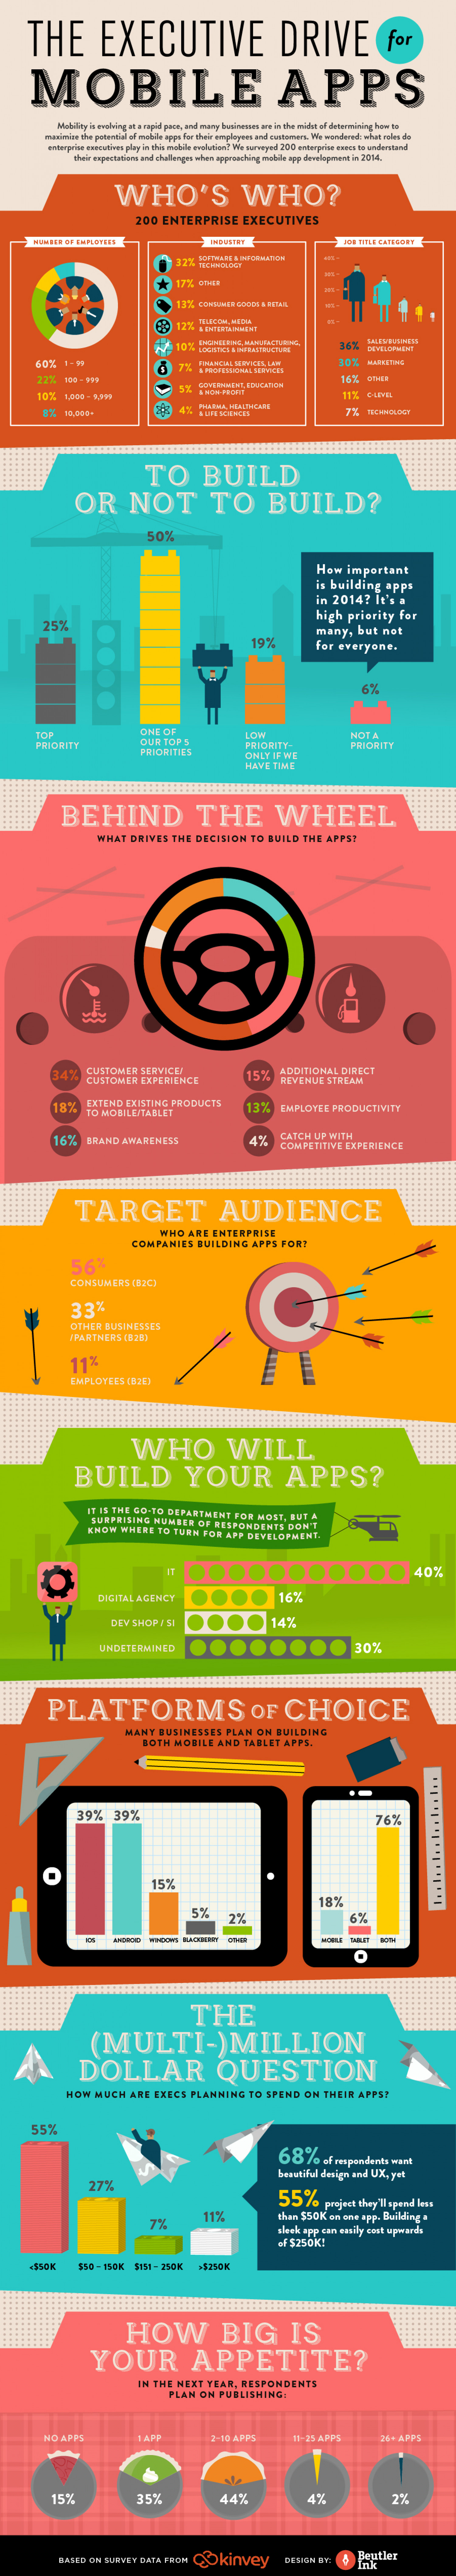 The Executive Drive for Mobile Apps Infographic